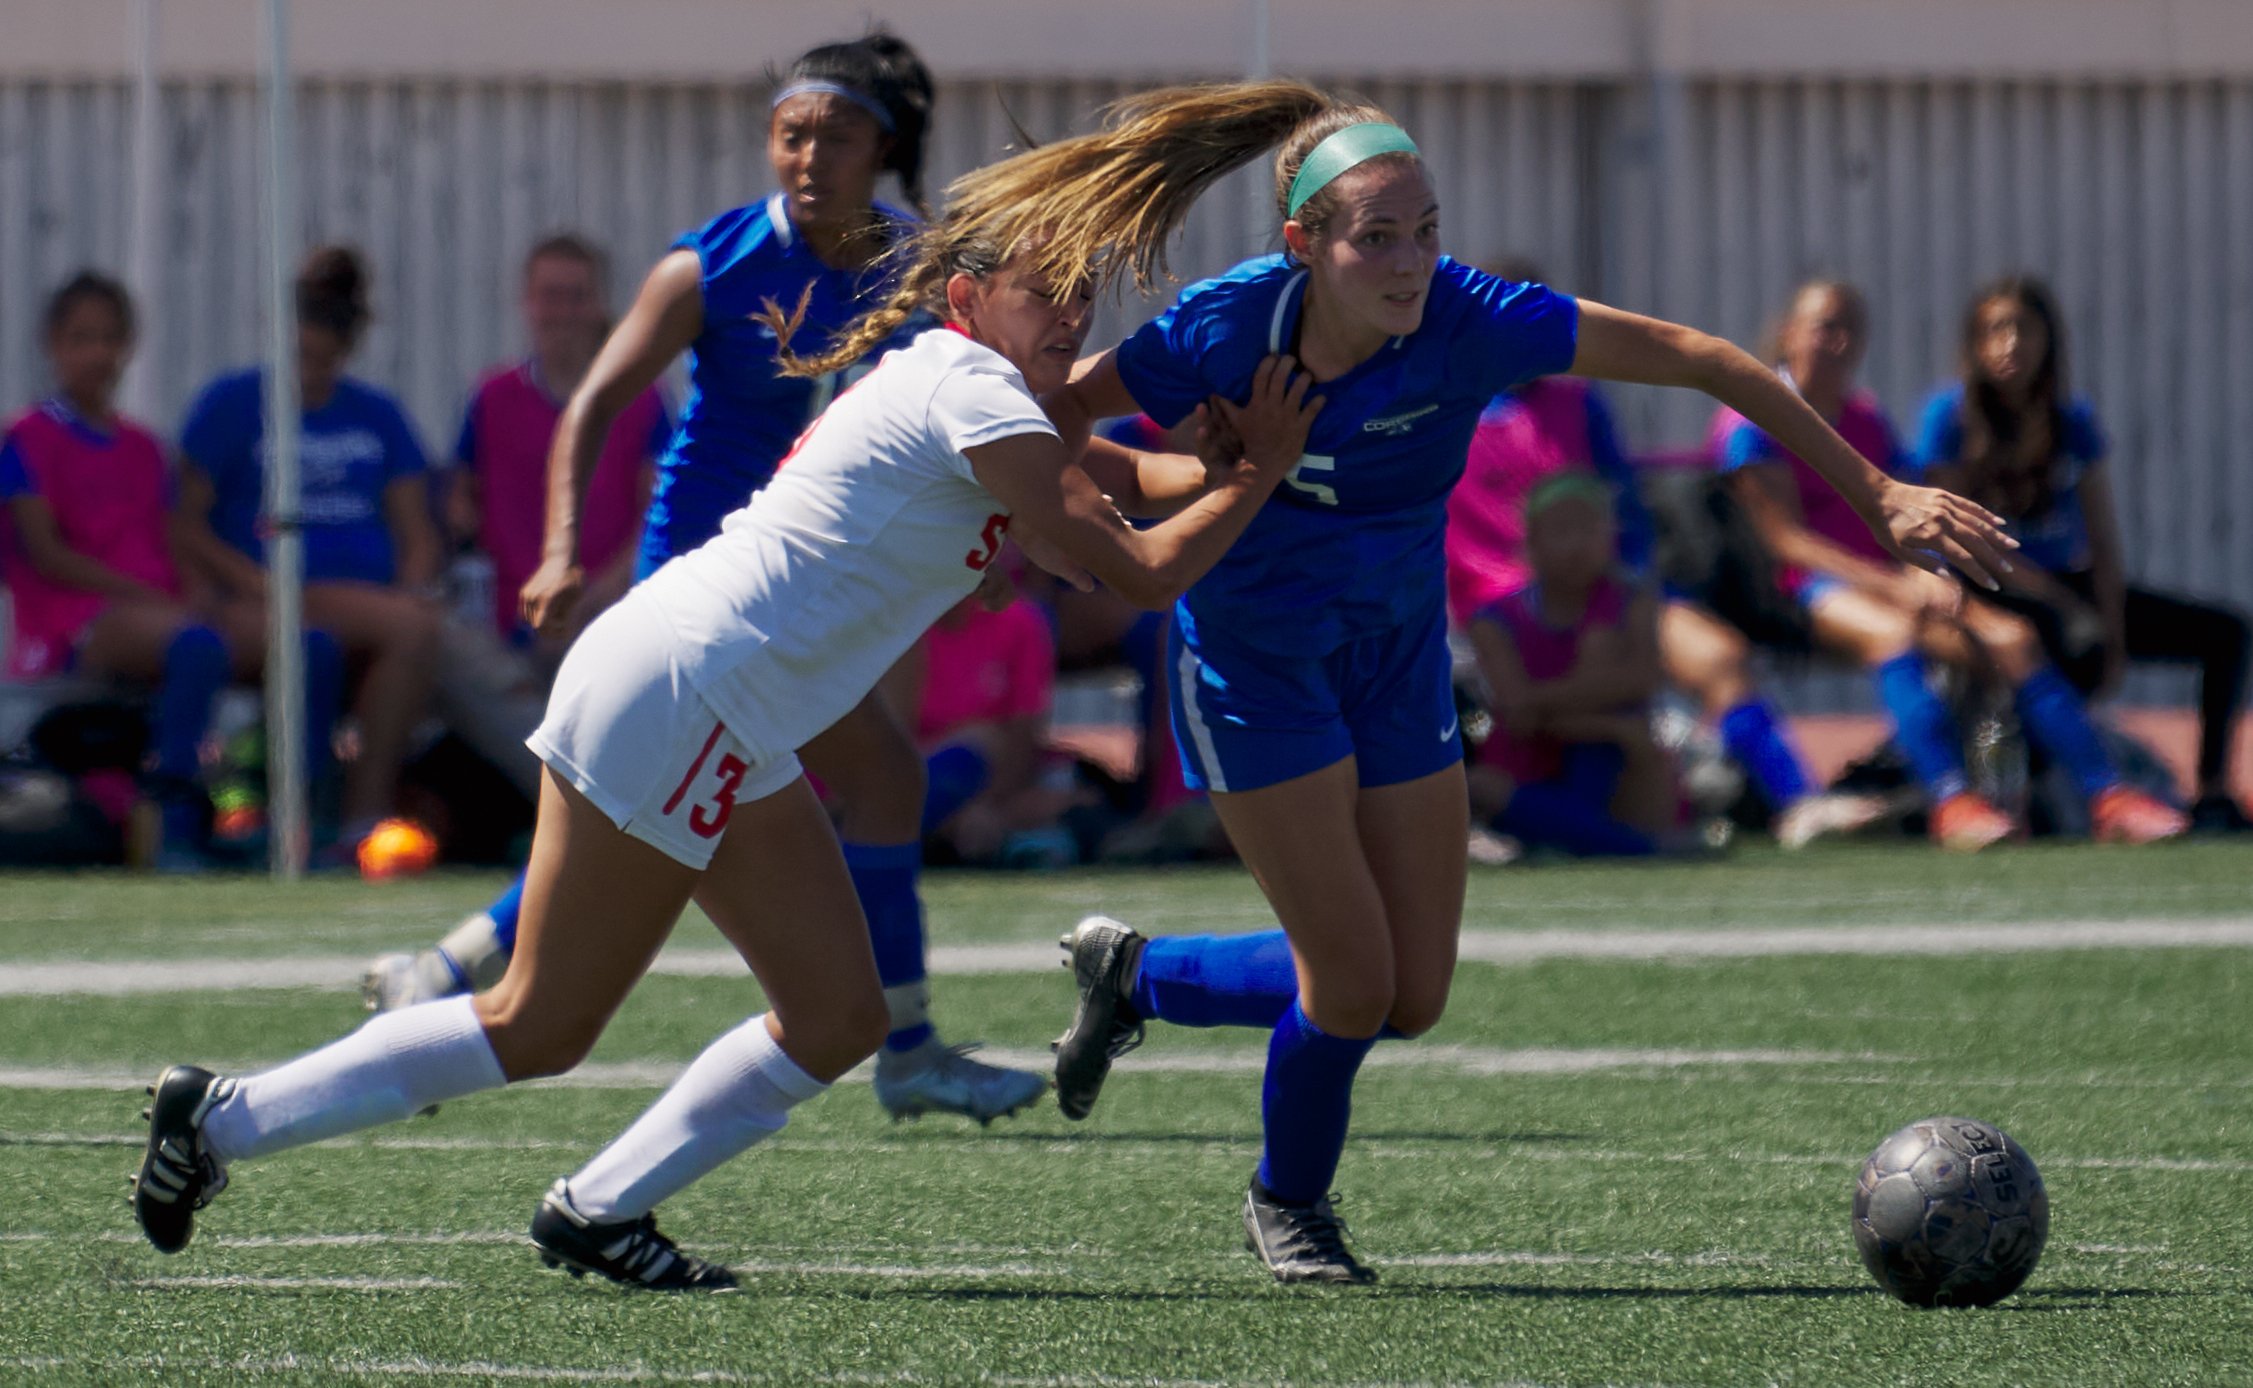  Santa Monica College Corsairs' Charlie Kayem (right) and Santa Barbara City College Vaqueros' Athena Bow Graham (left) during the women's soccer game on Tuesday, Sept. 20, 2022, at Corsair Field in Santa Monica, Calif. The game ended in a 1-1 tie. (